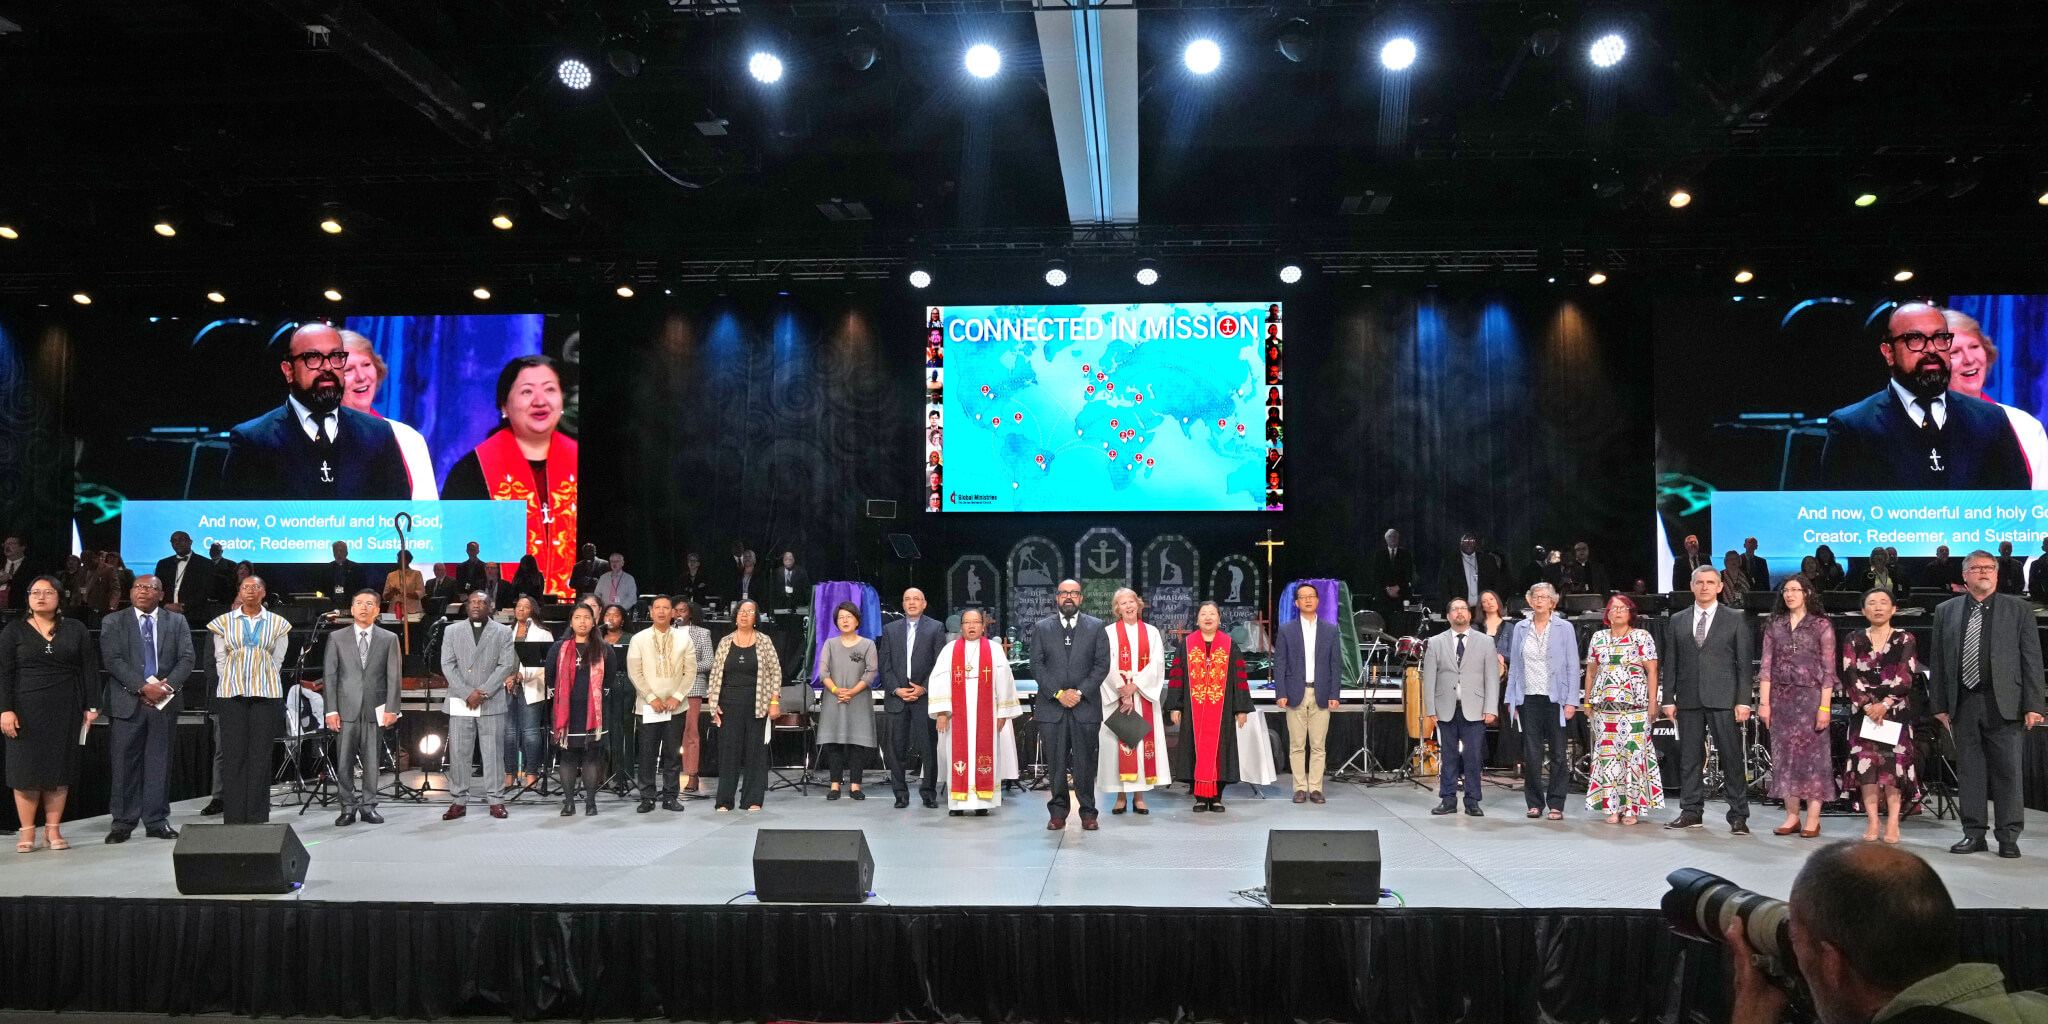 Mission and more: major milestones at General Conference  